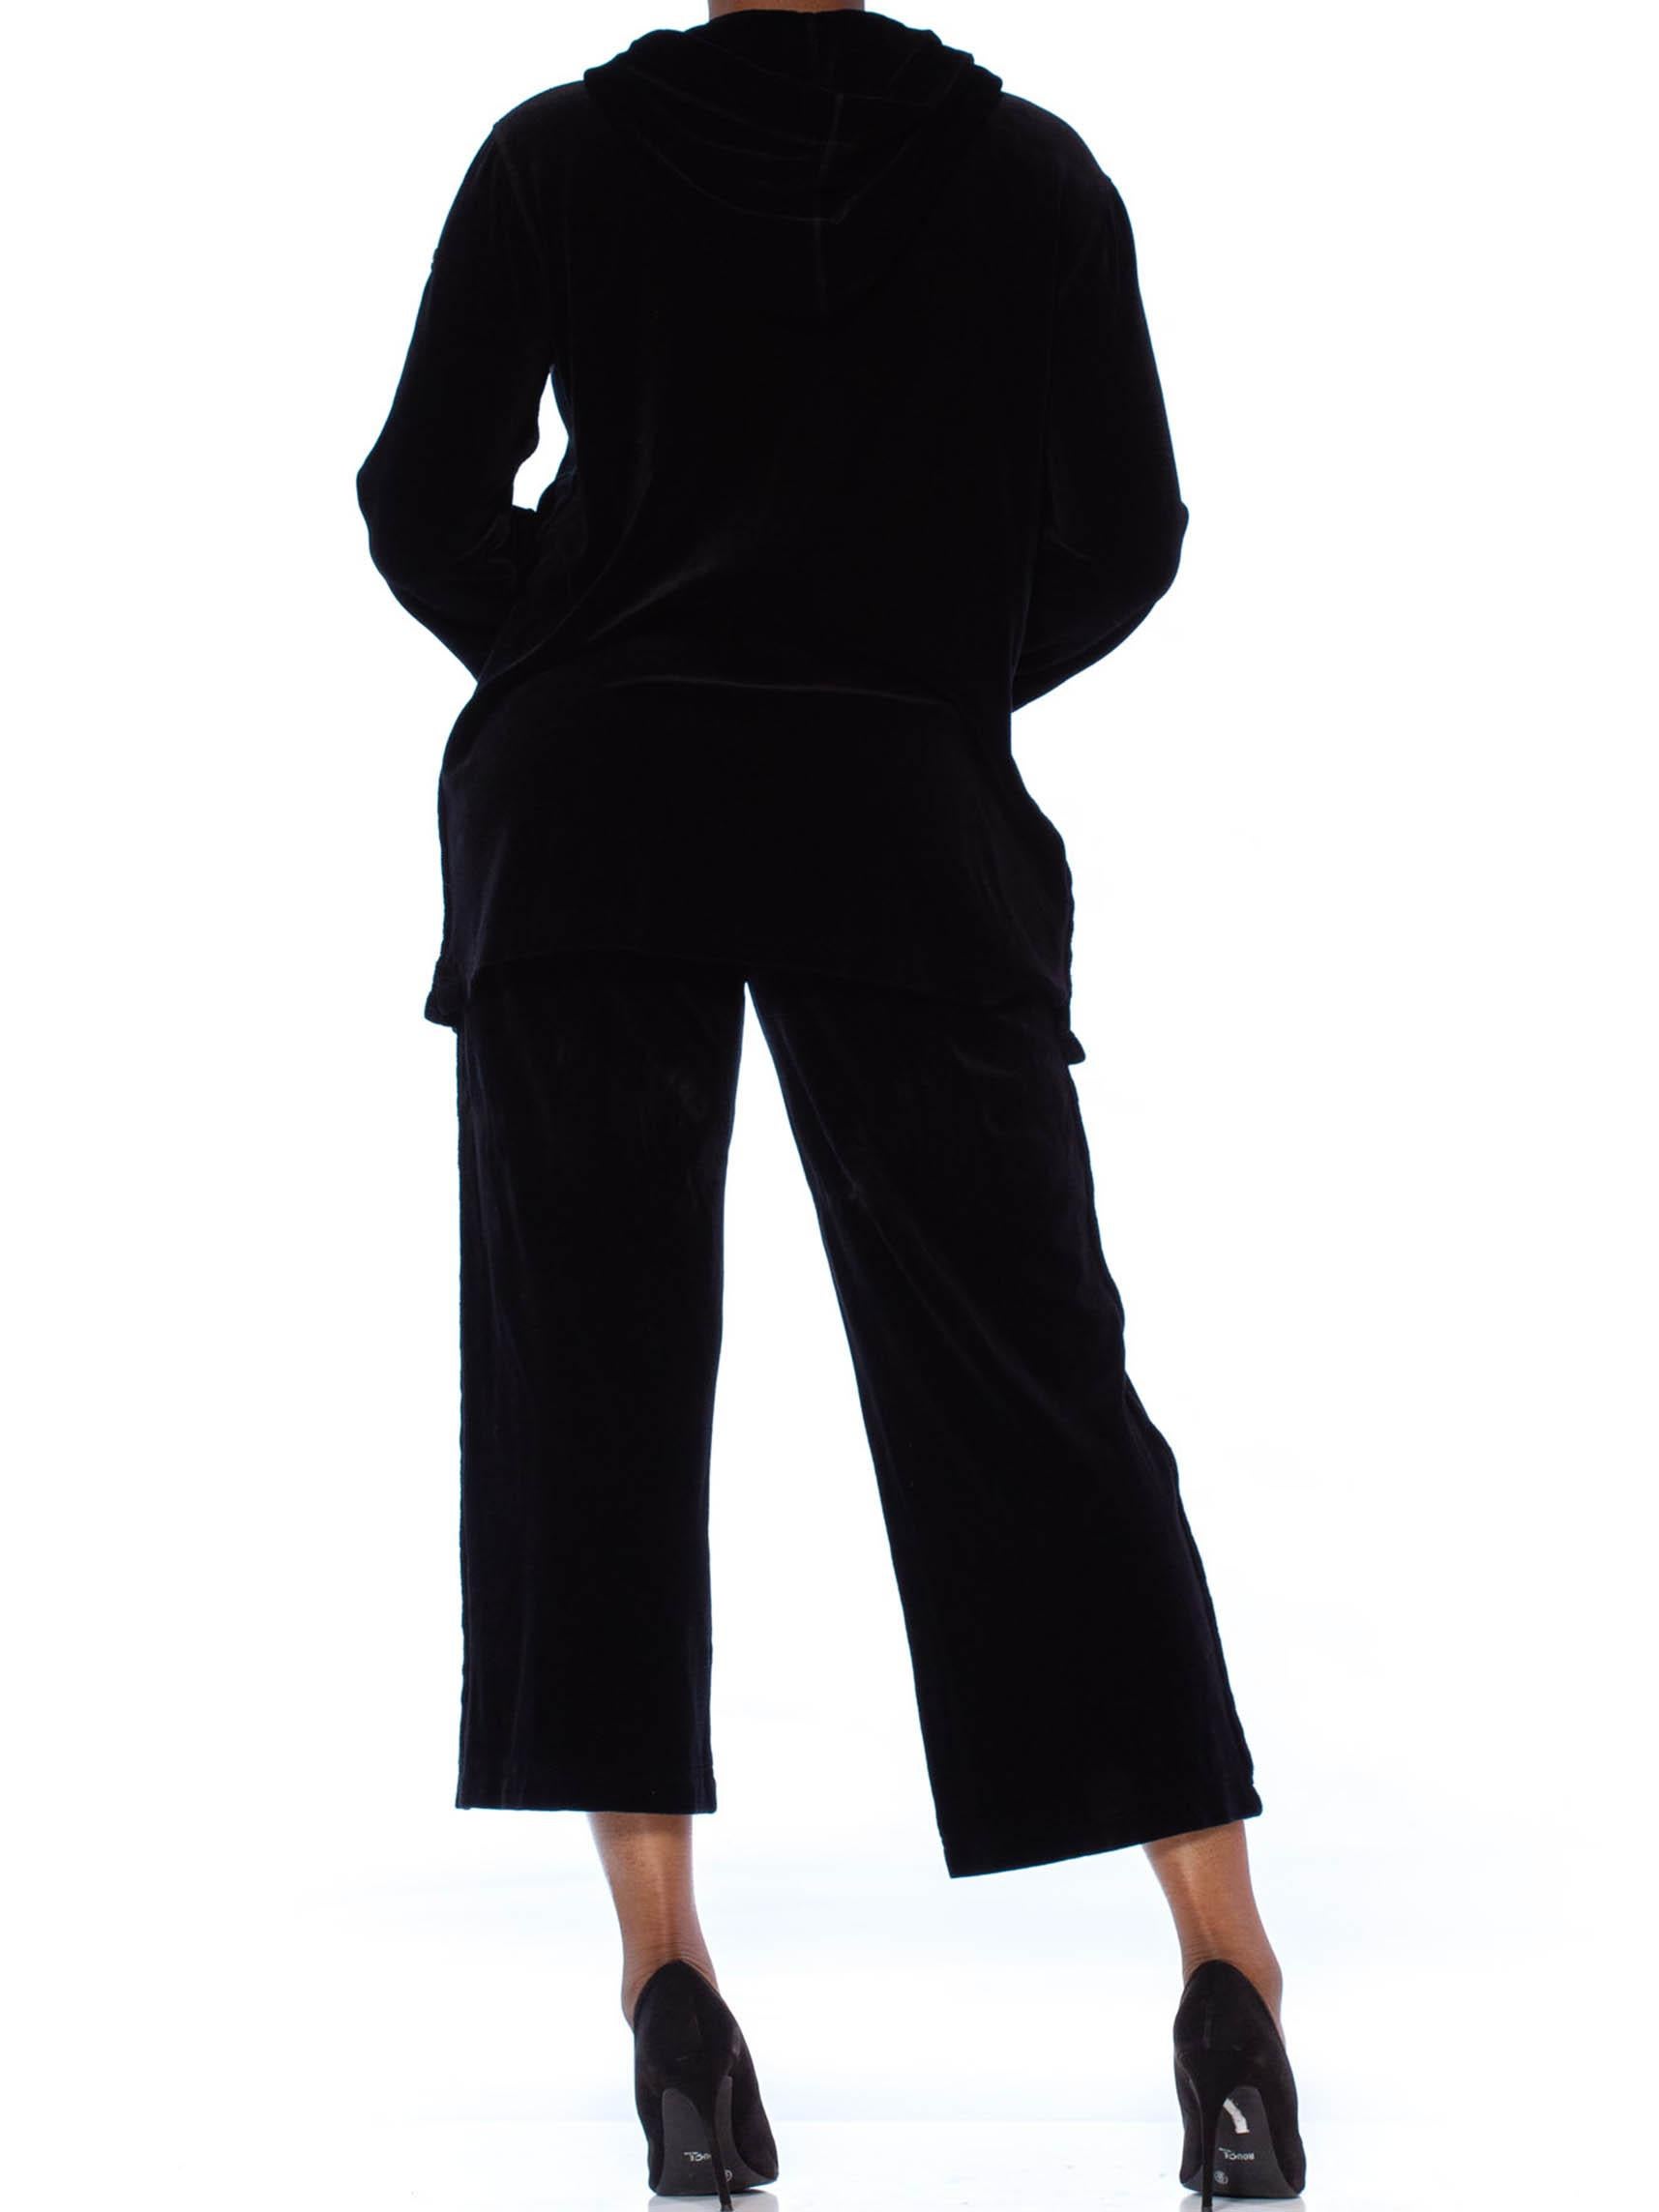 1990S SONIA RYKIEL Black Cotton / Rayon Stretch Velvet Hoodie Pant Suit With Lo For Sale 3